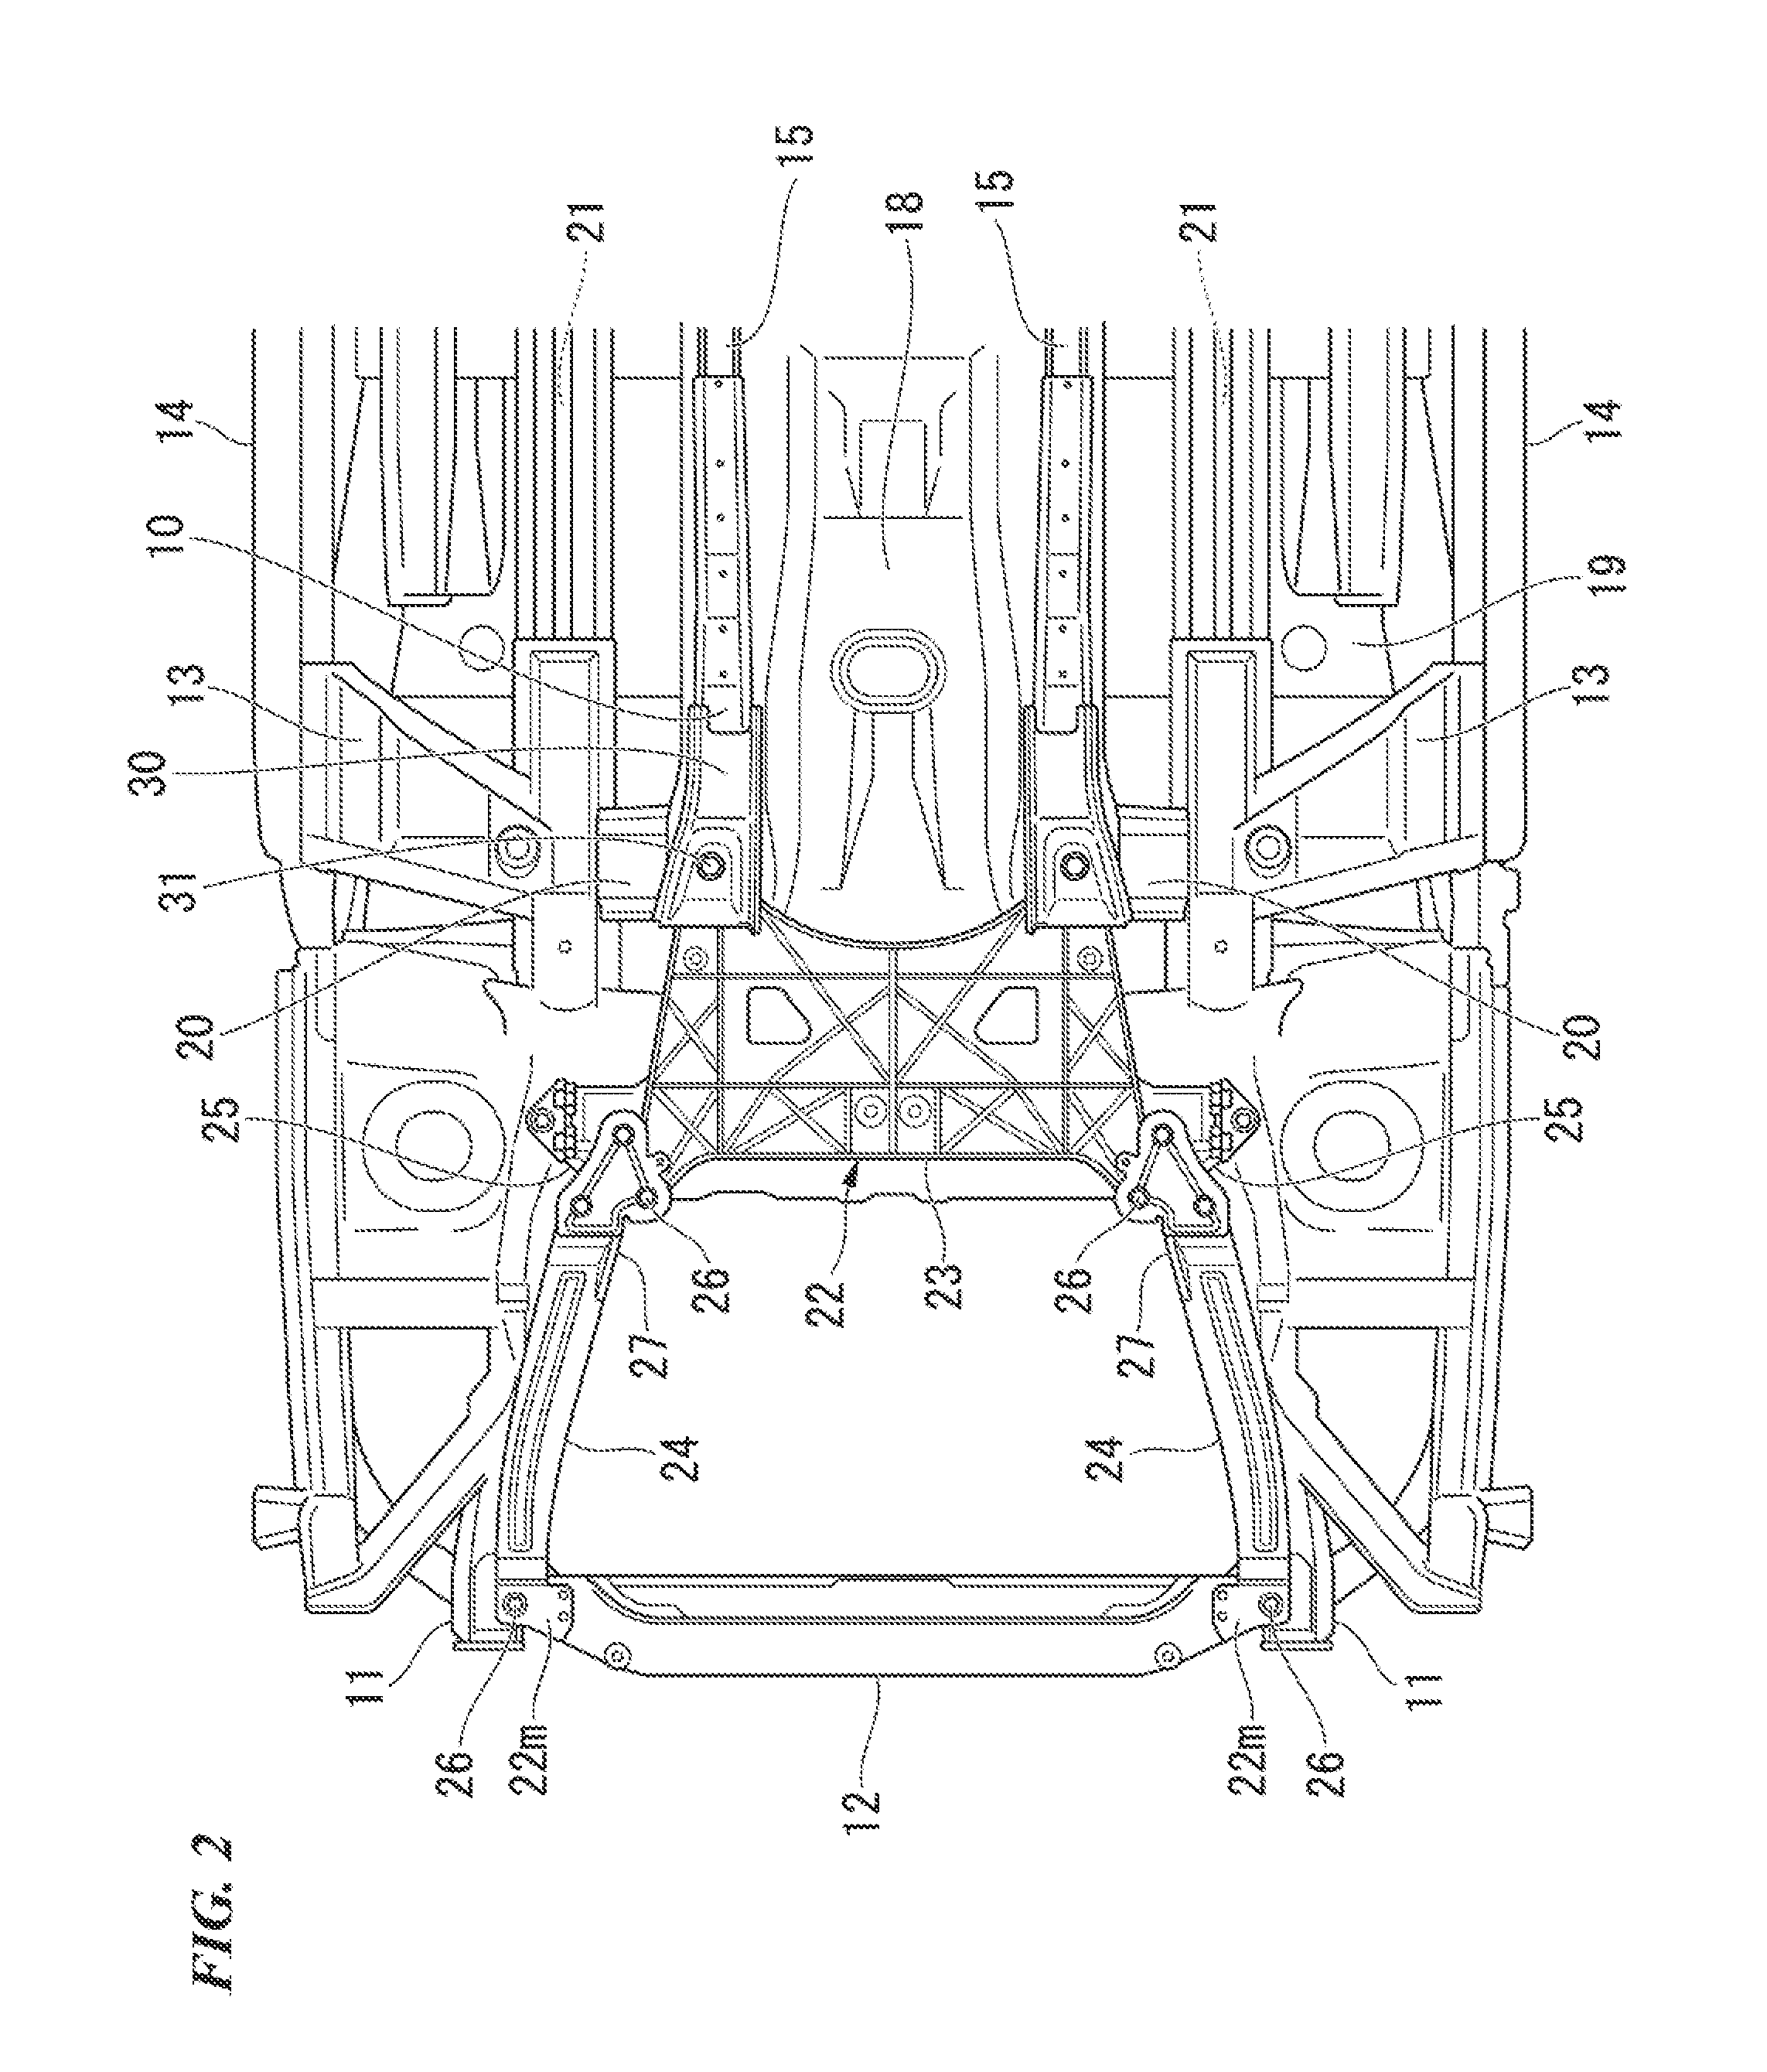 Vehicle body frame structure for automobile